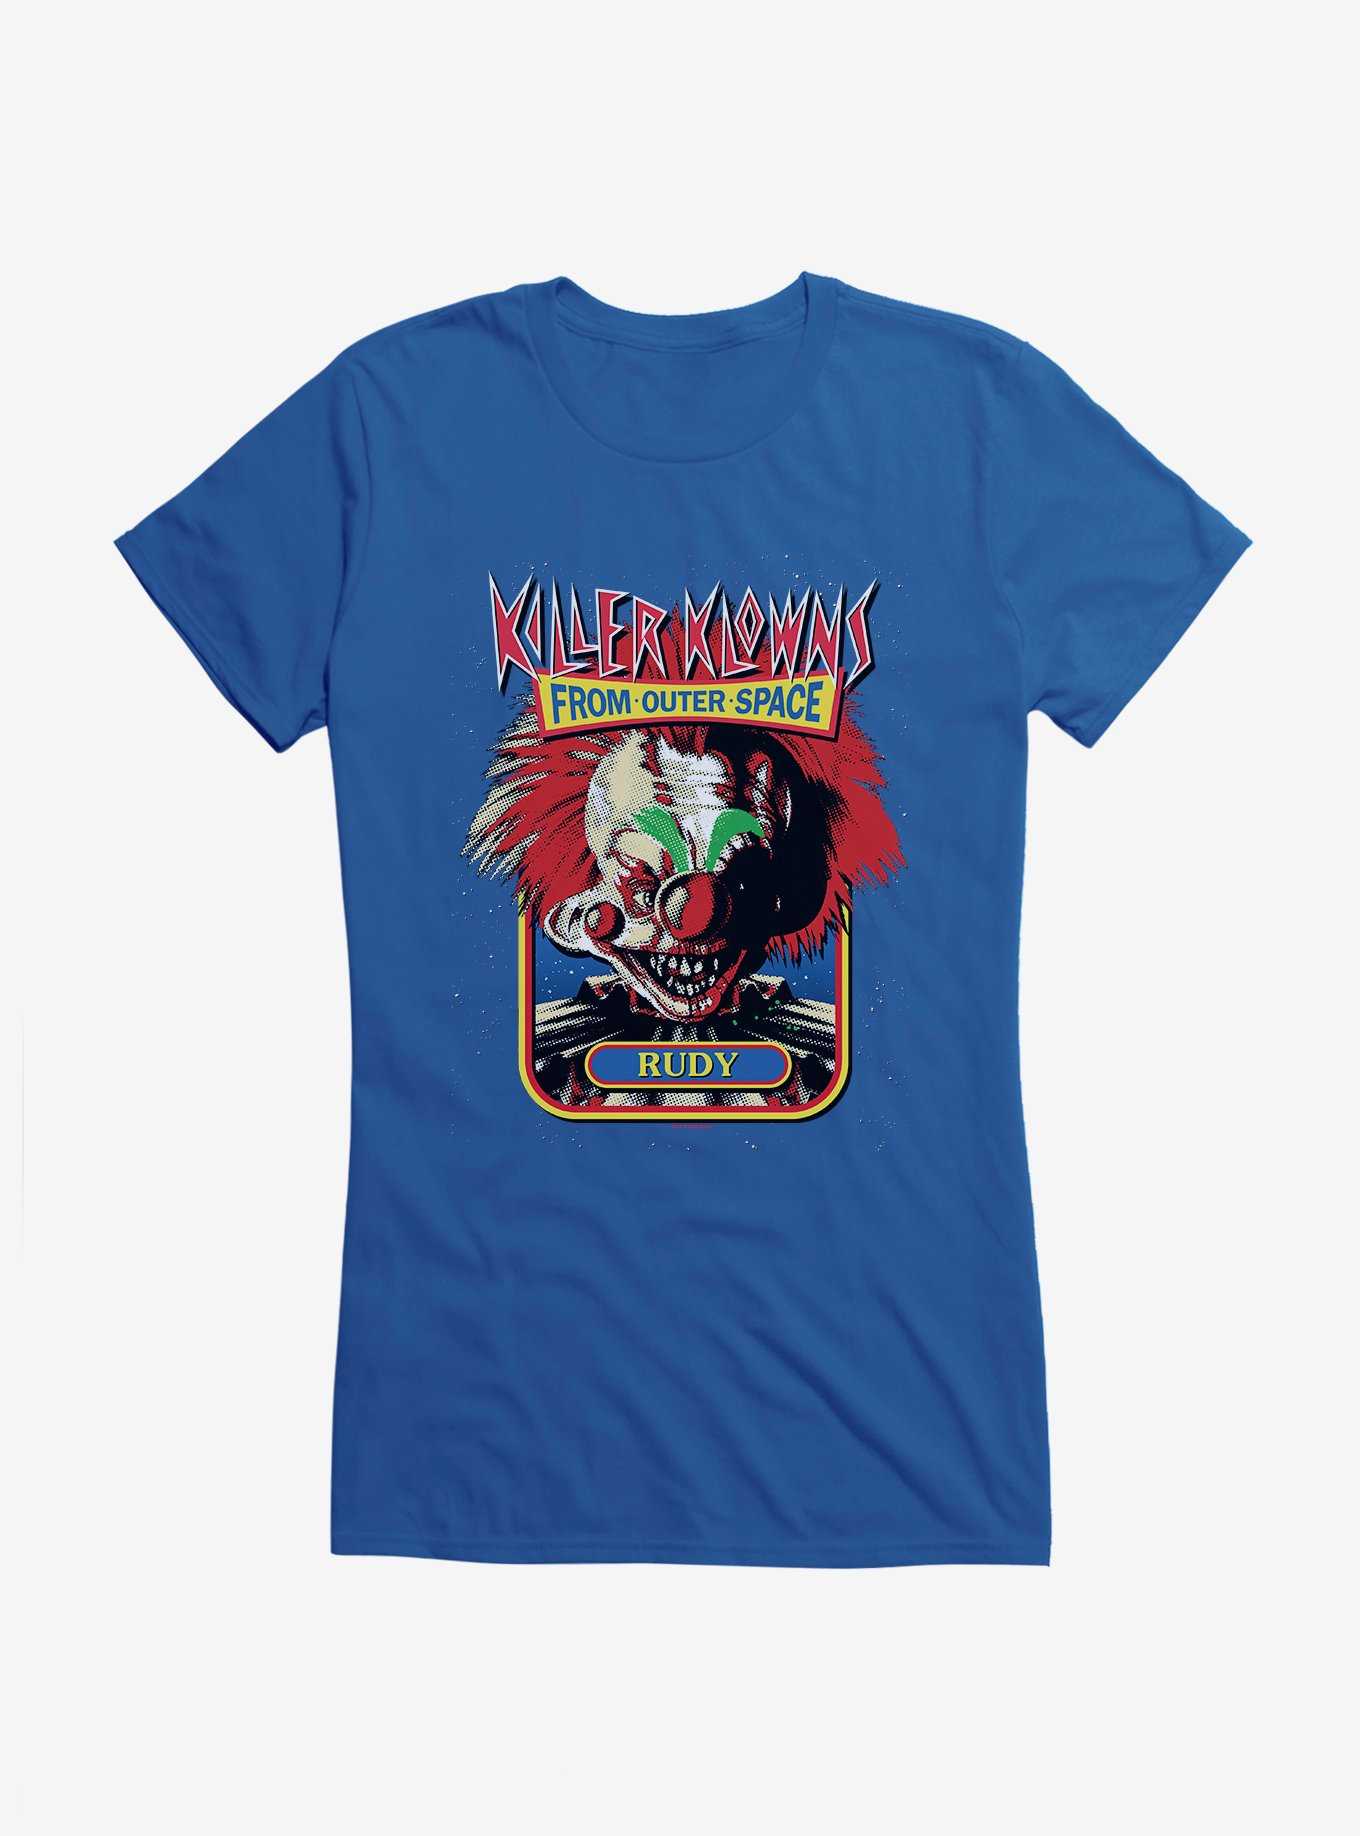 Killer Klowns From Outer Space Rudy Girls T-Shirt, , hi-res